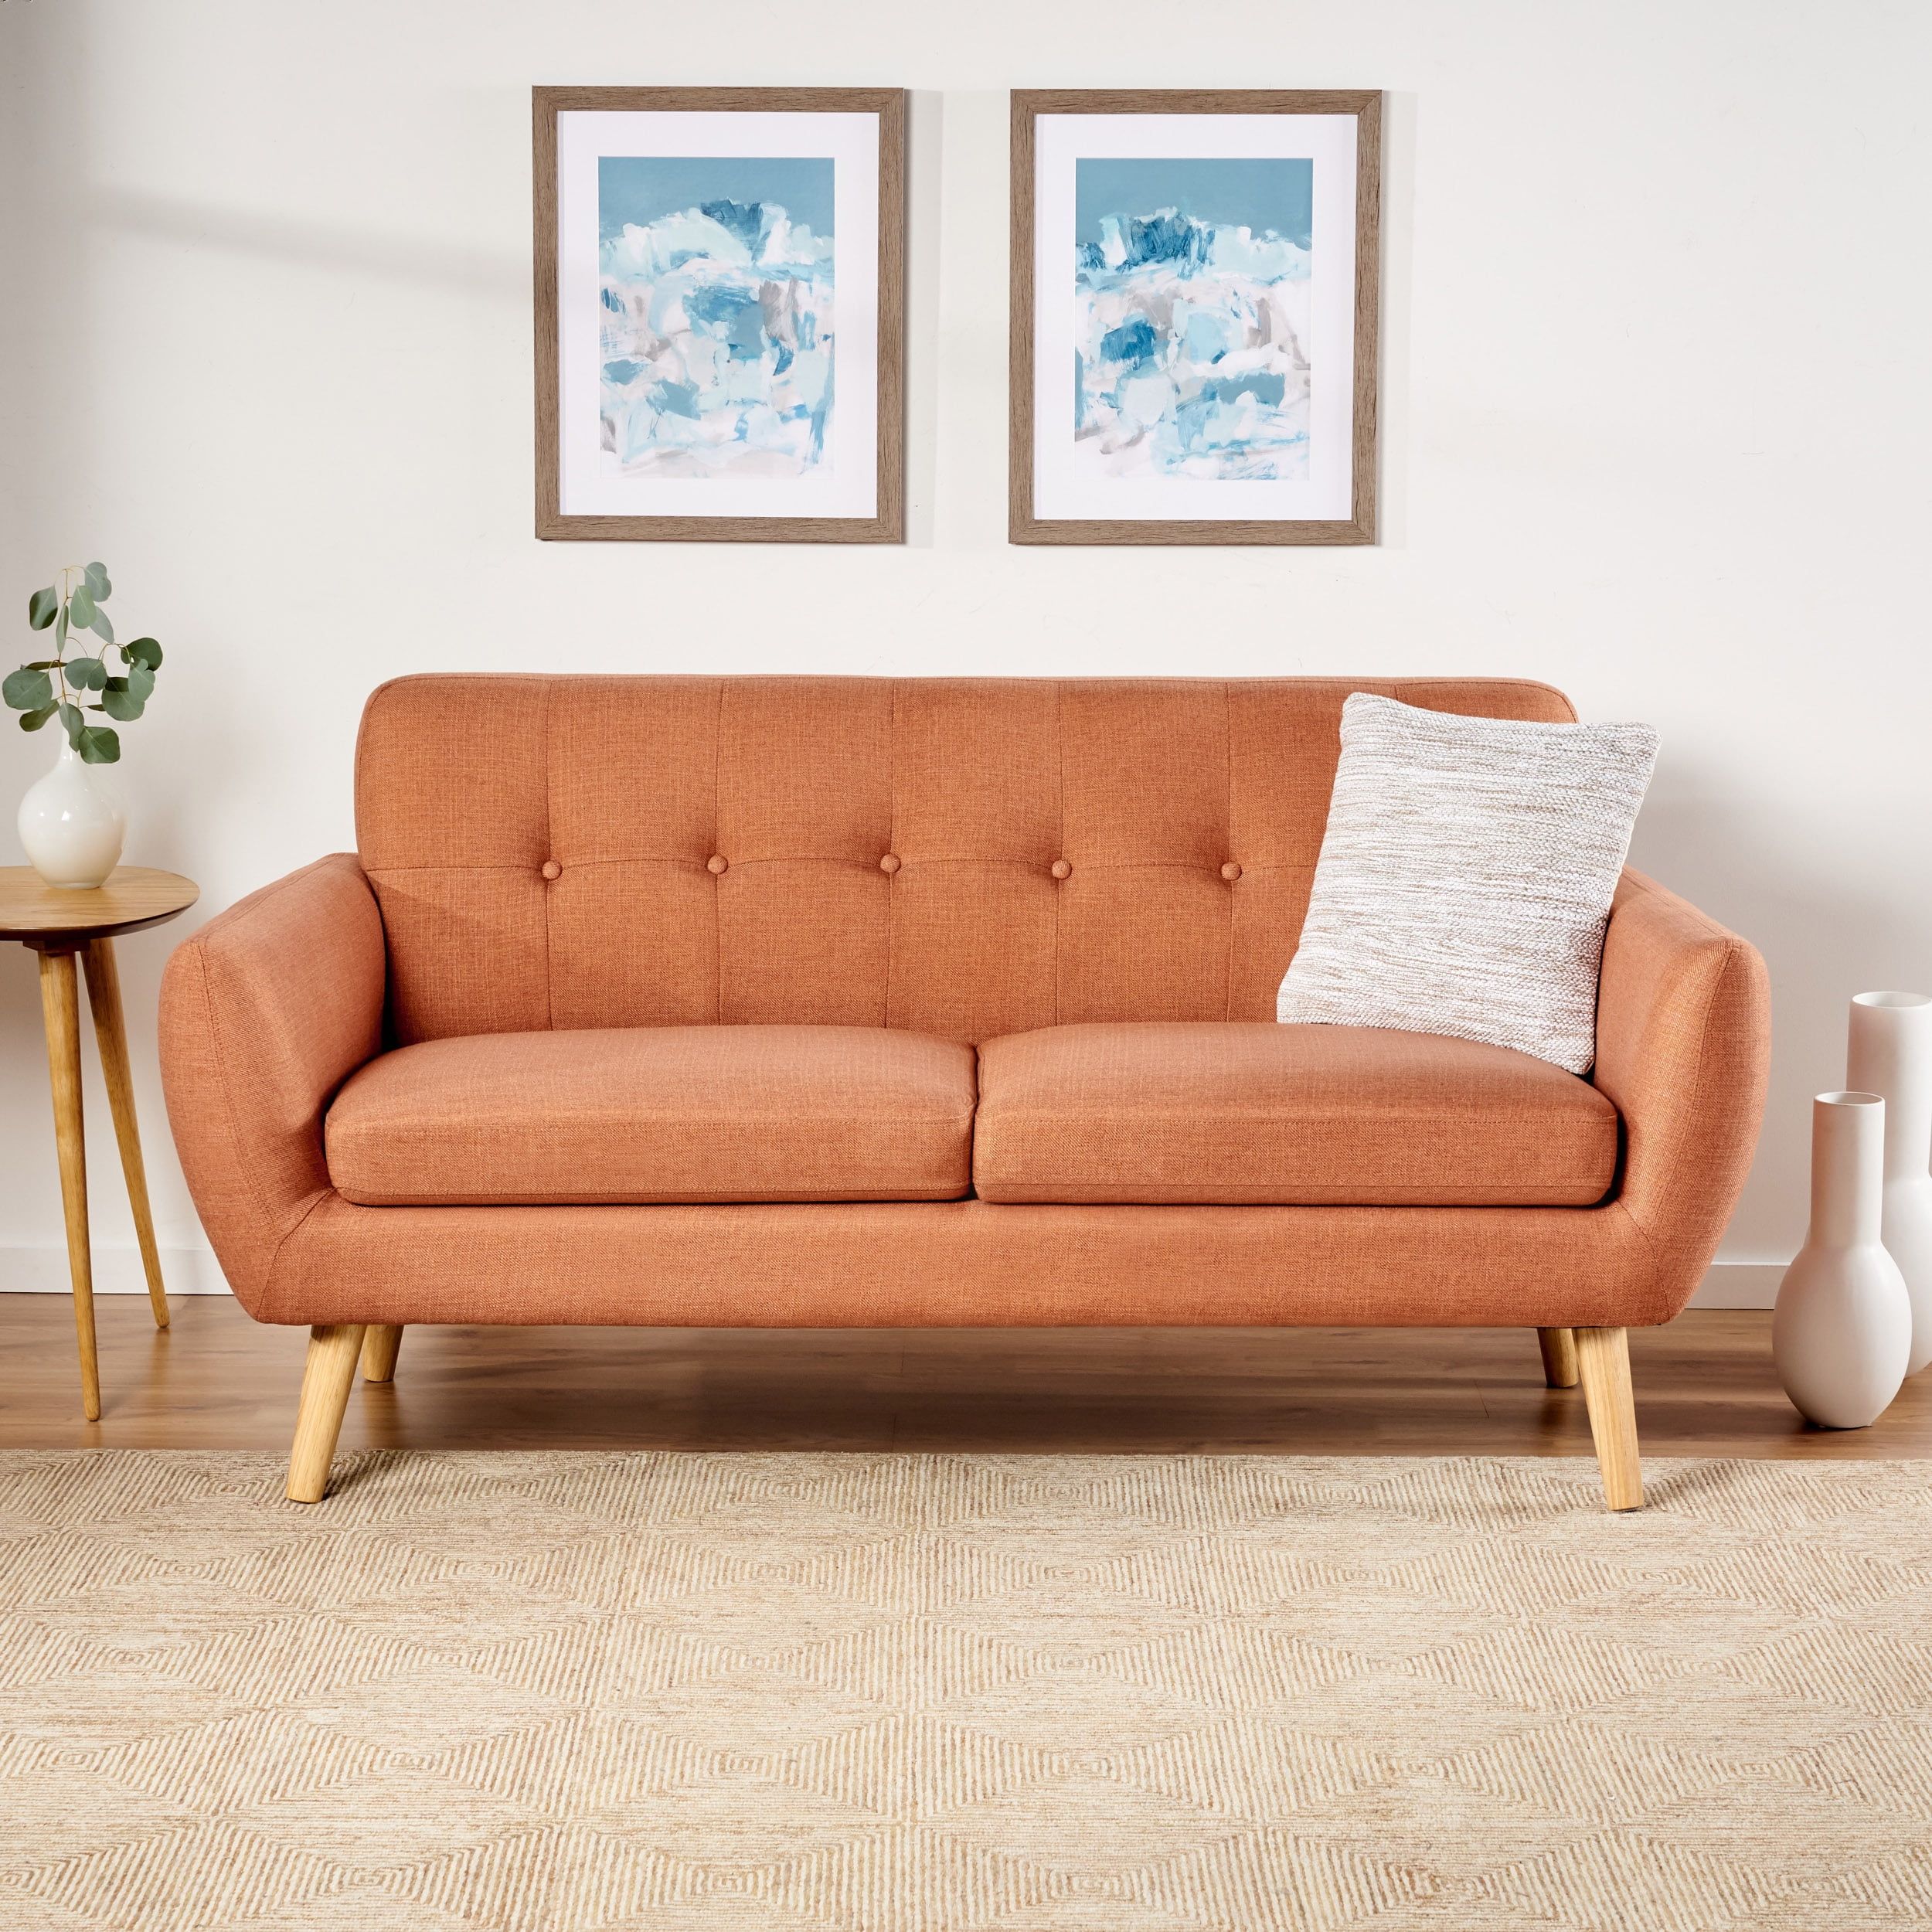 Noble House Abitha Fabric Tufted Sofa, Burnt Orange, Natural Oak Pertaining To Mid Century Modern Sofas (View 9 of 20)